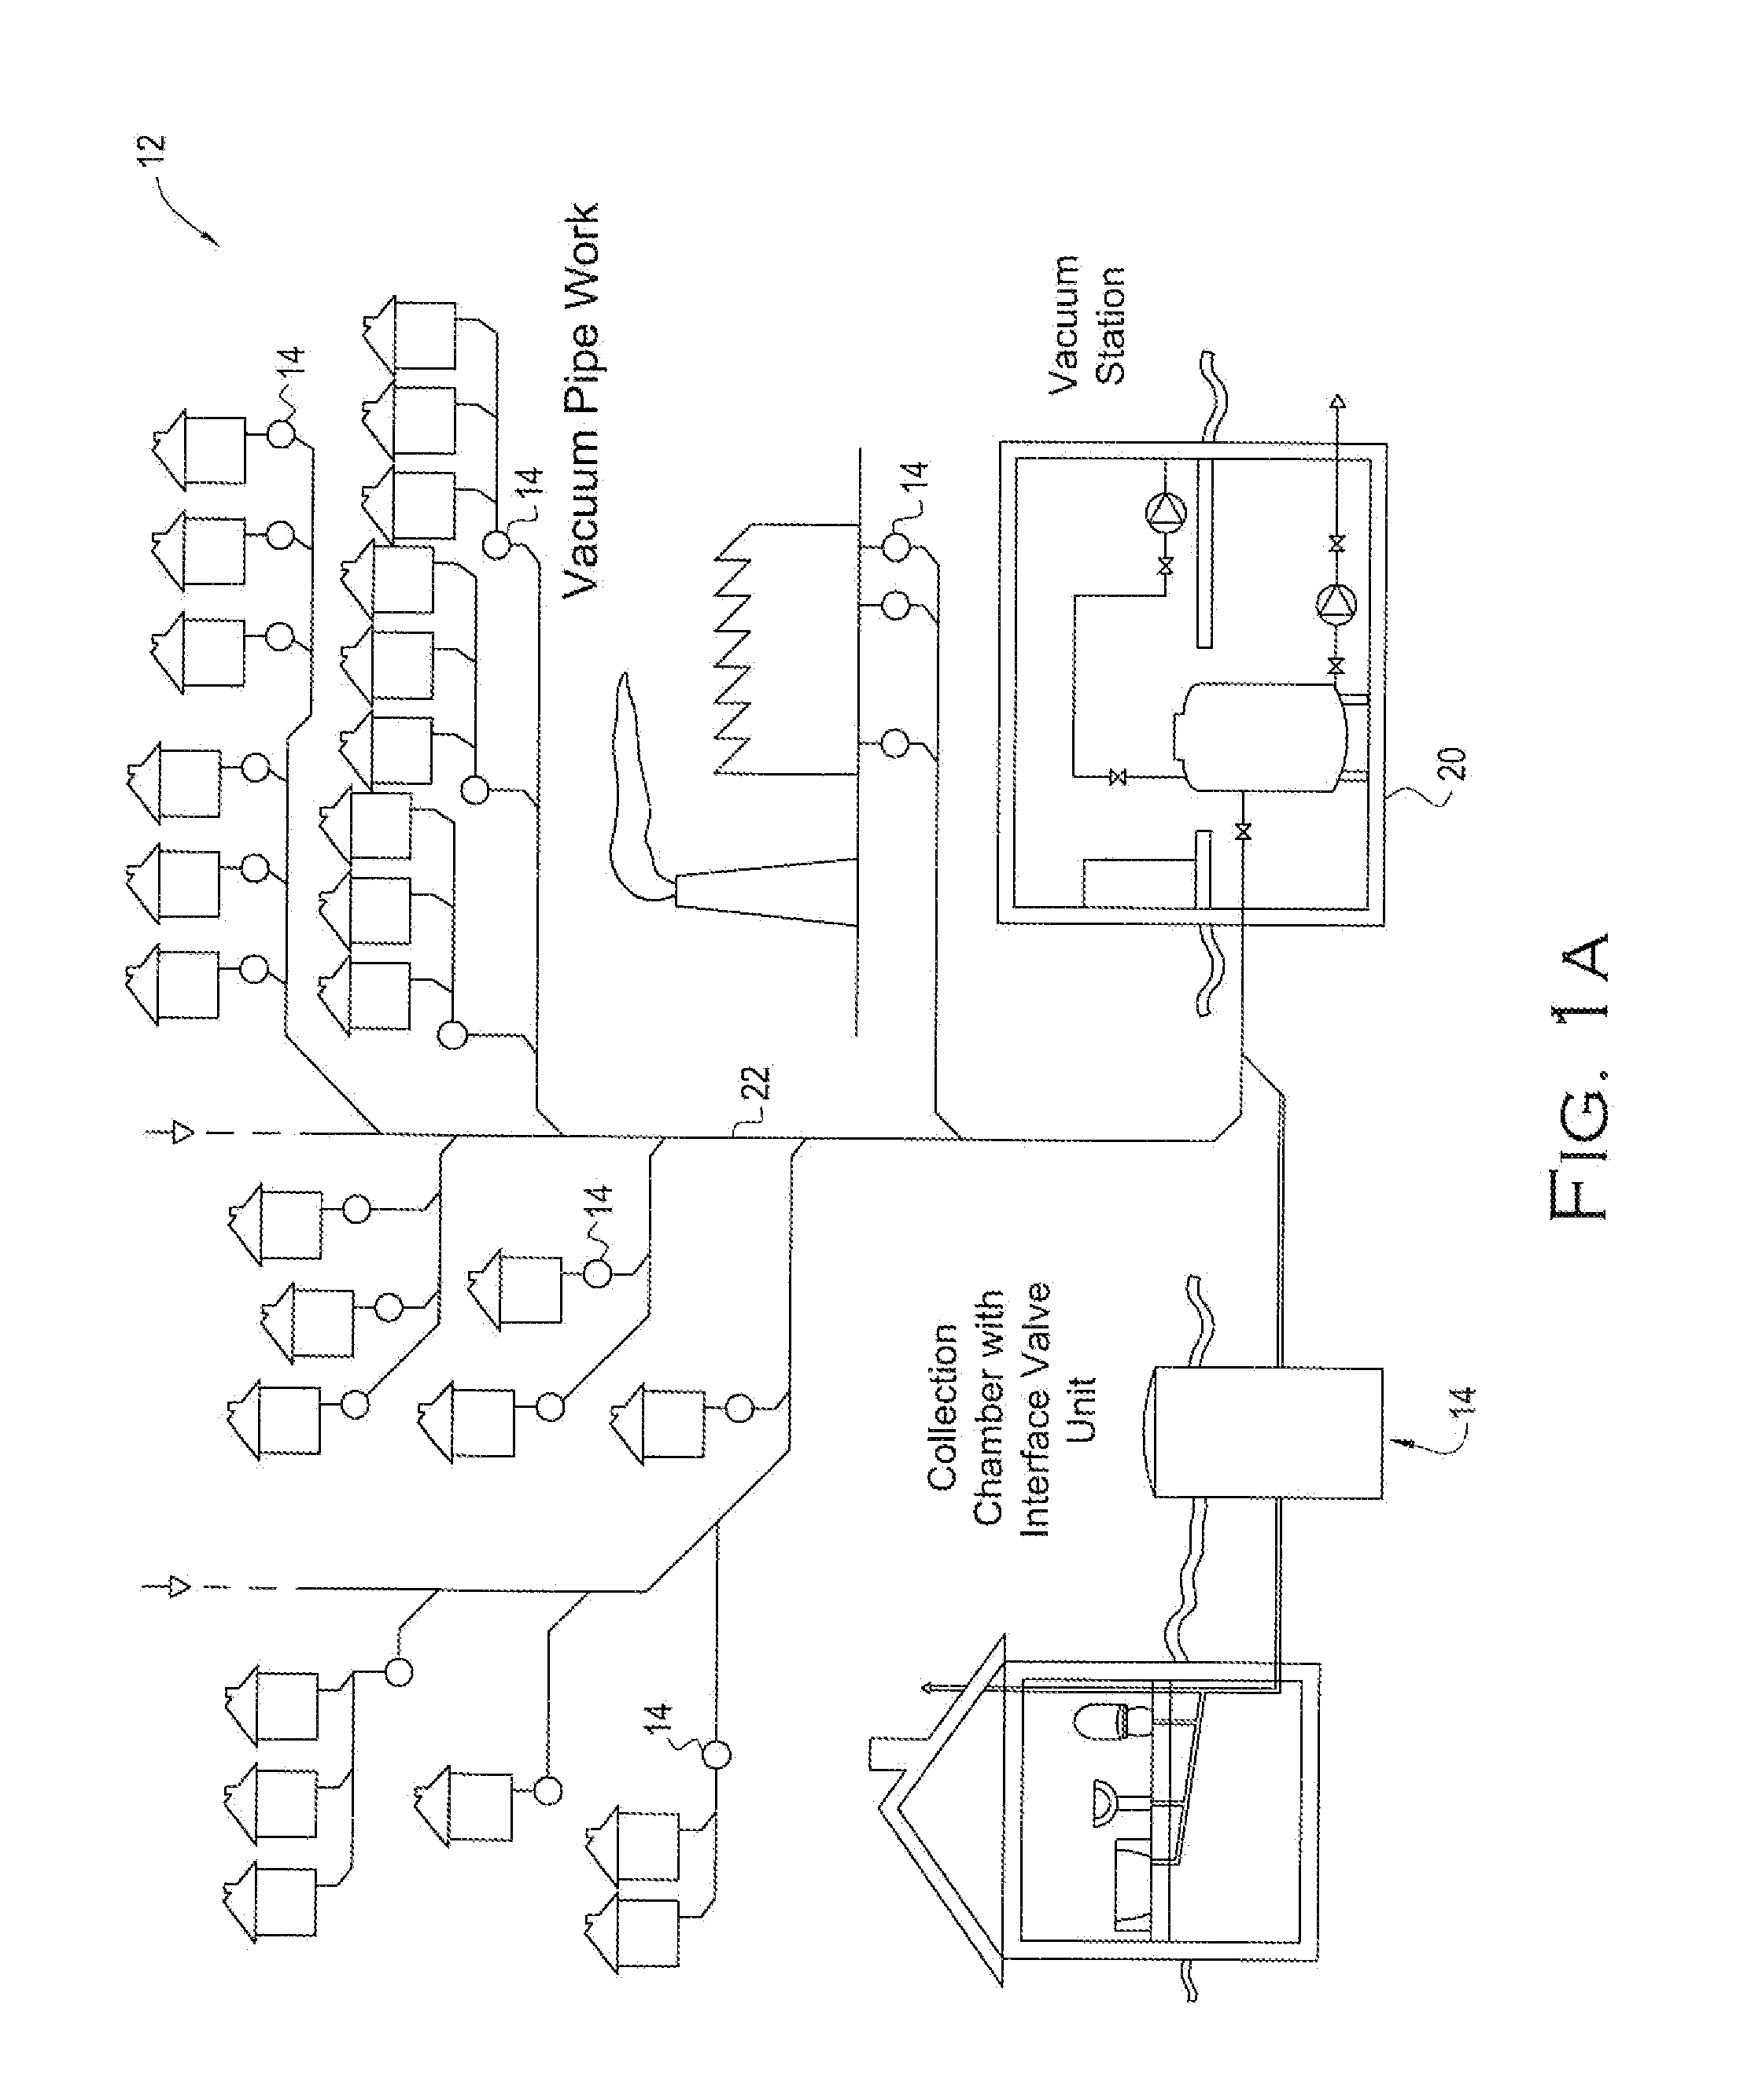 Valve malfunctioning detection system for a vacuum sewer and associated methods